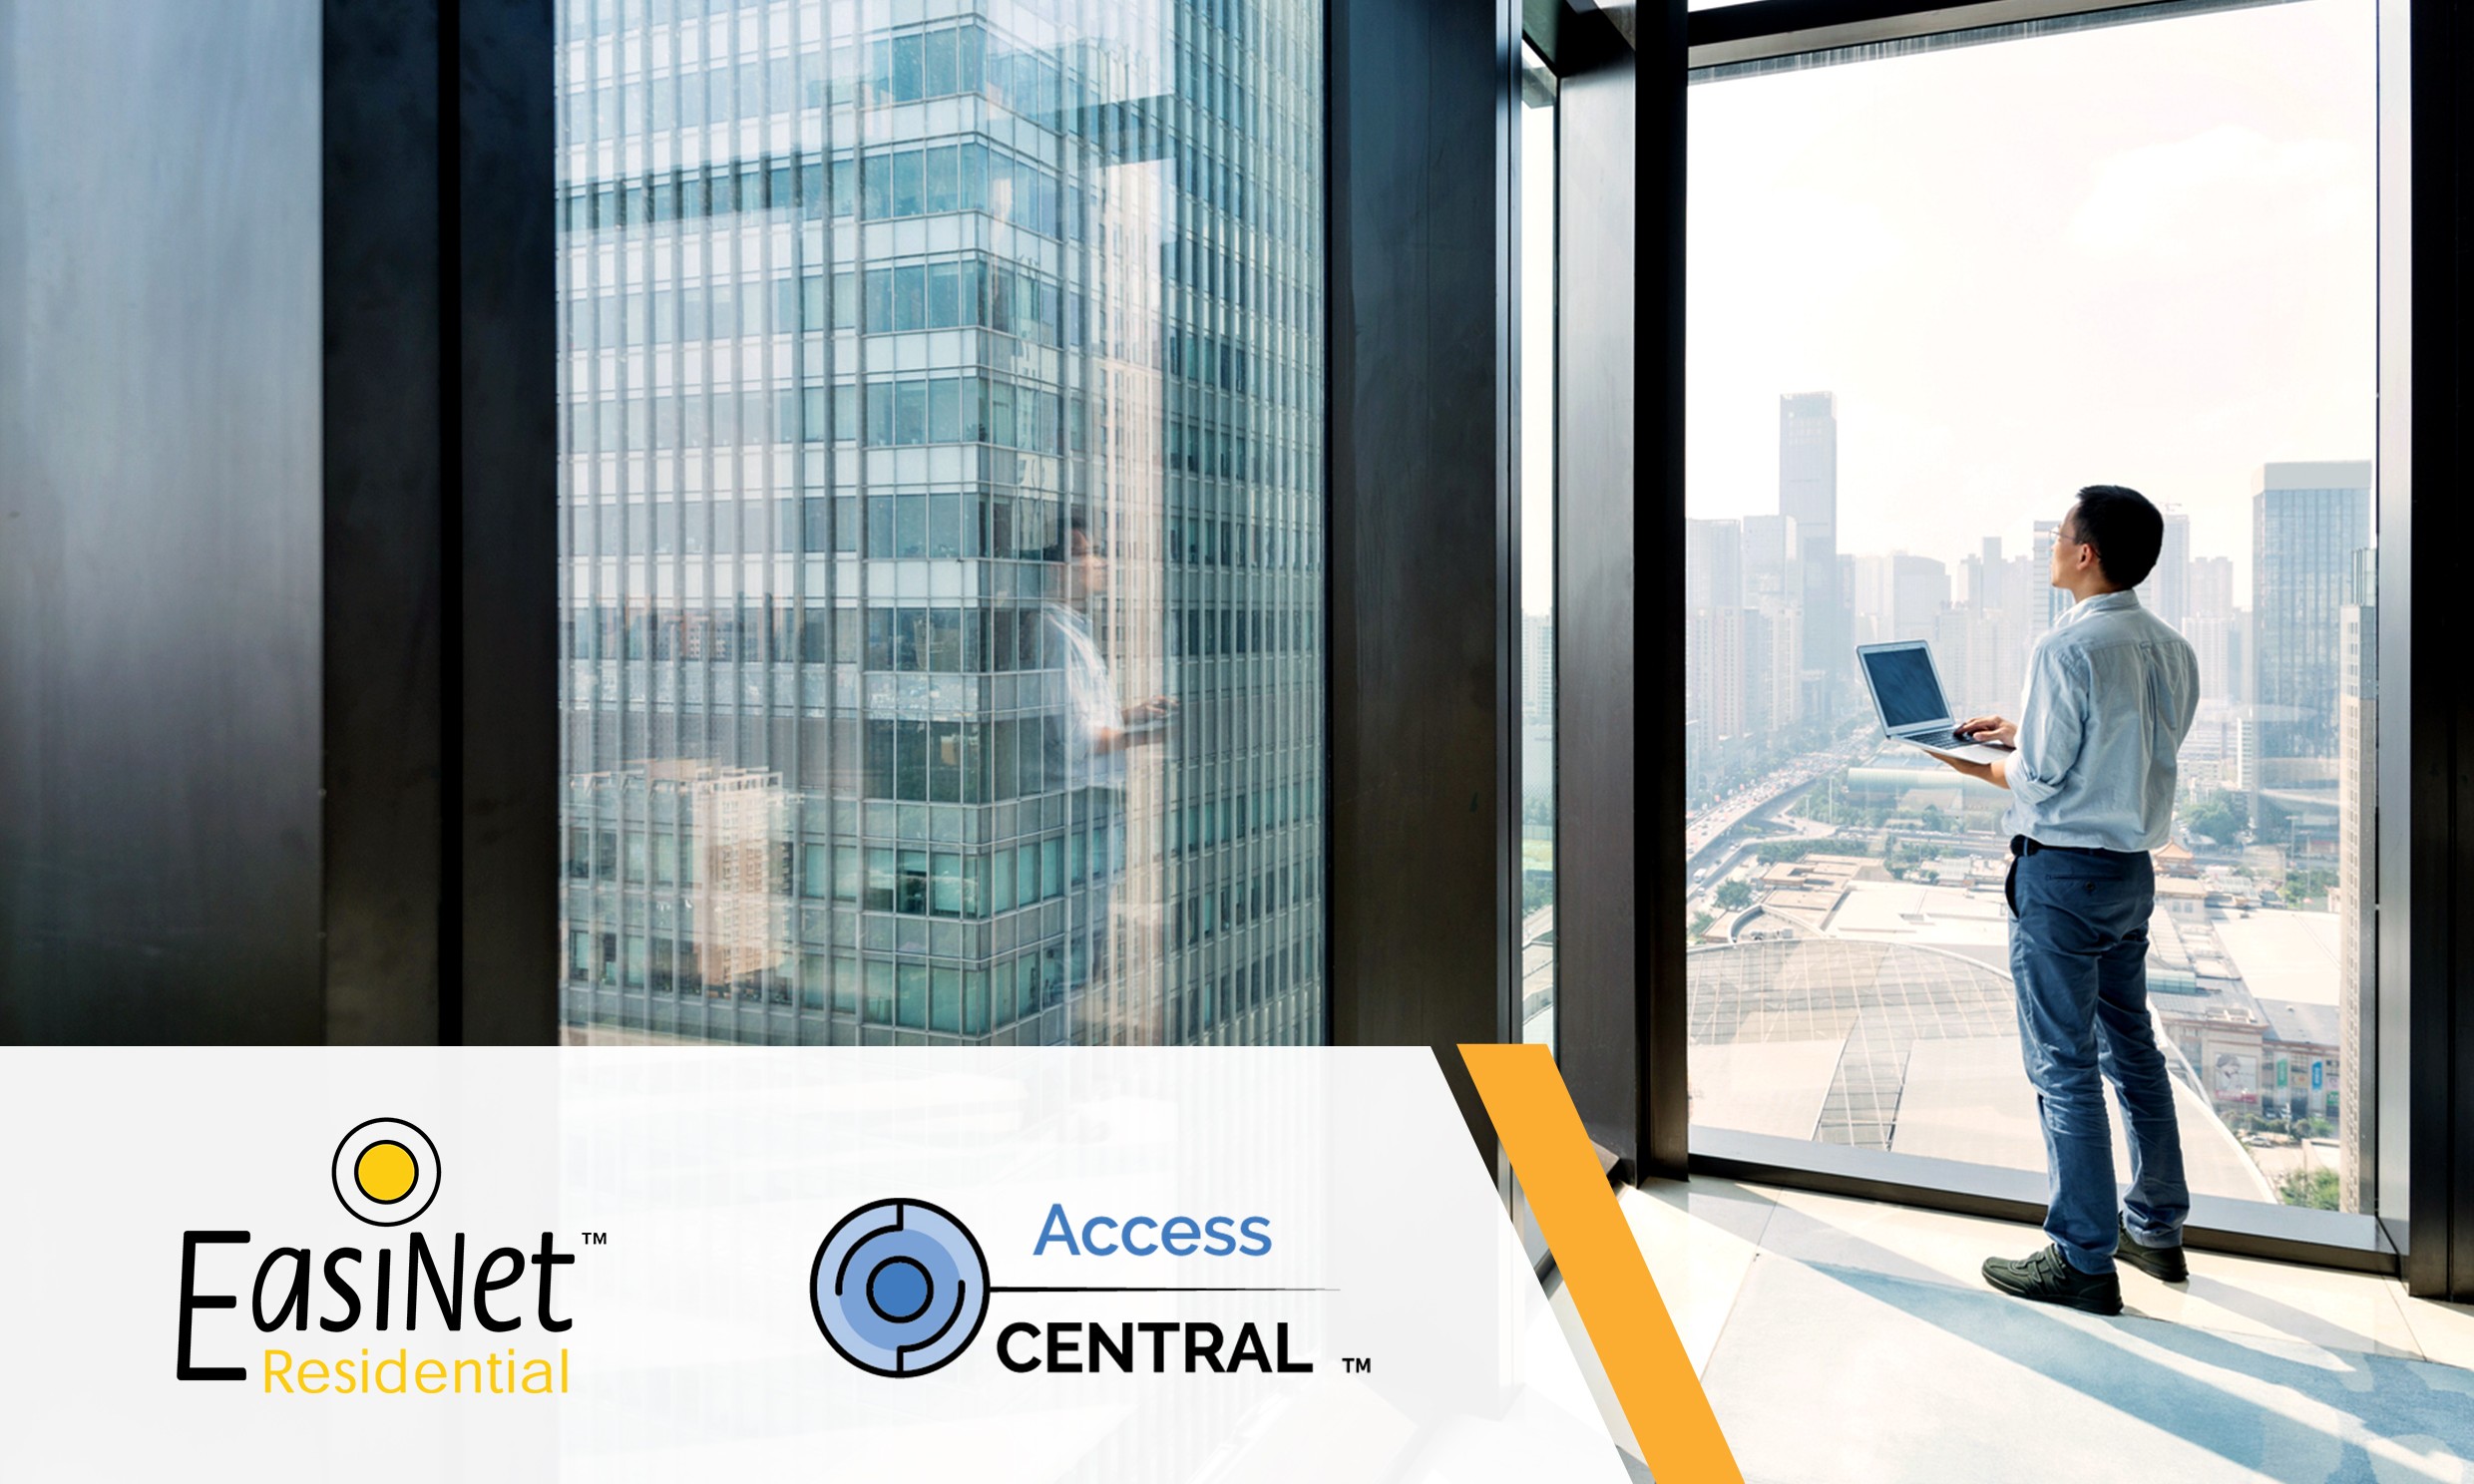 PAC addresses post-lockdown access control challenges with new versions of Access Central and EasiNet Residential